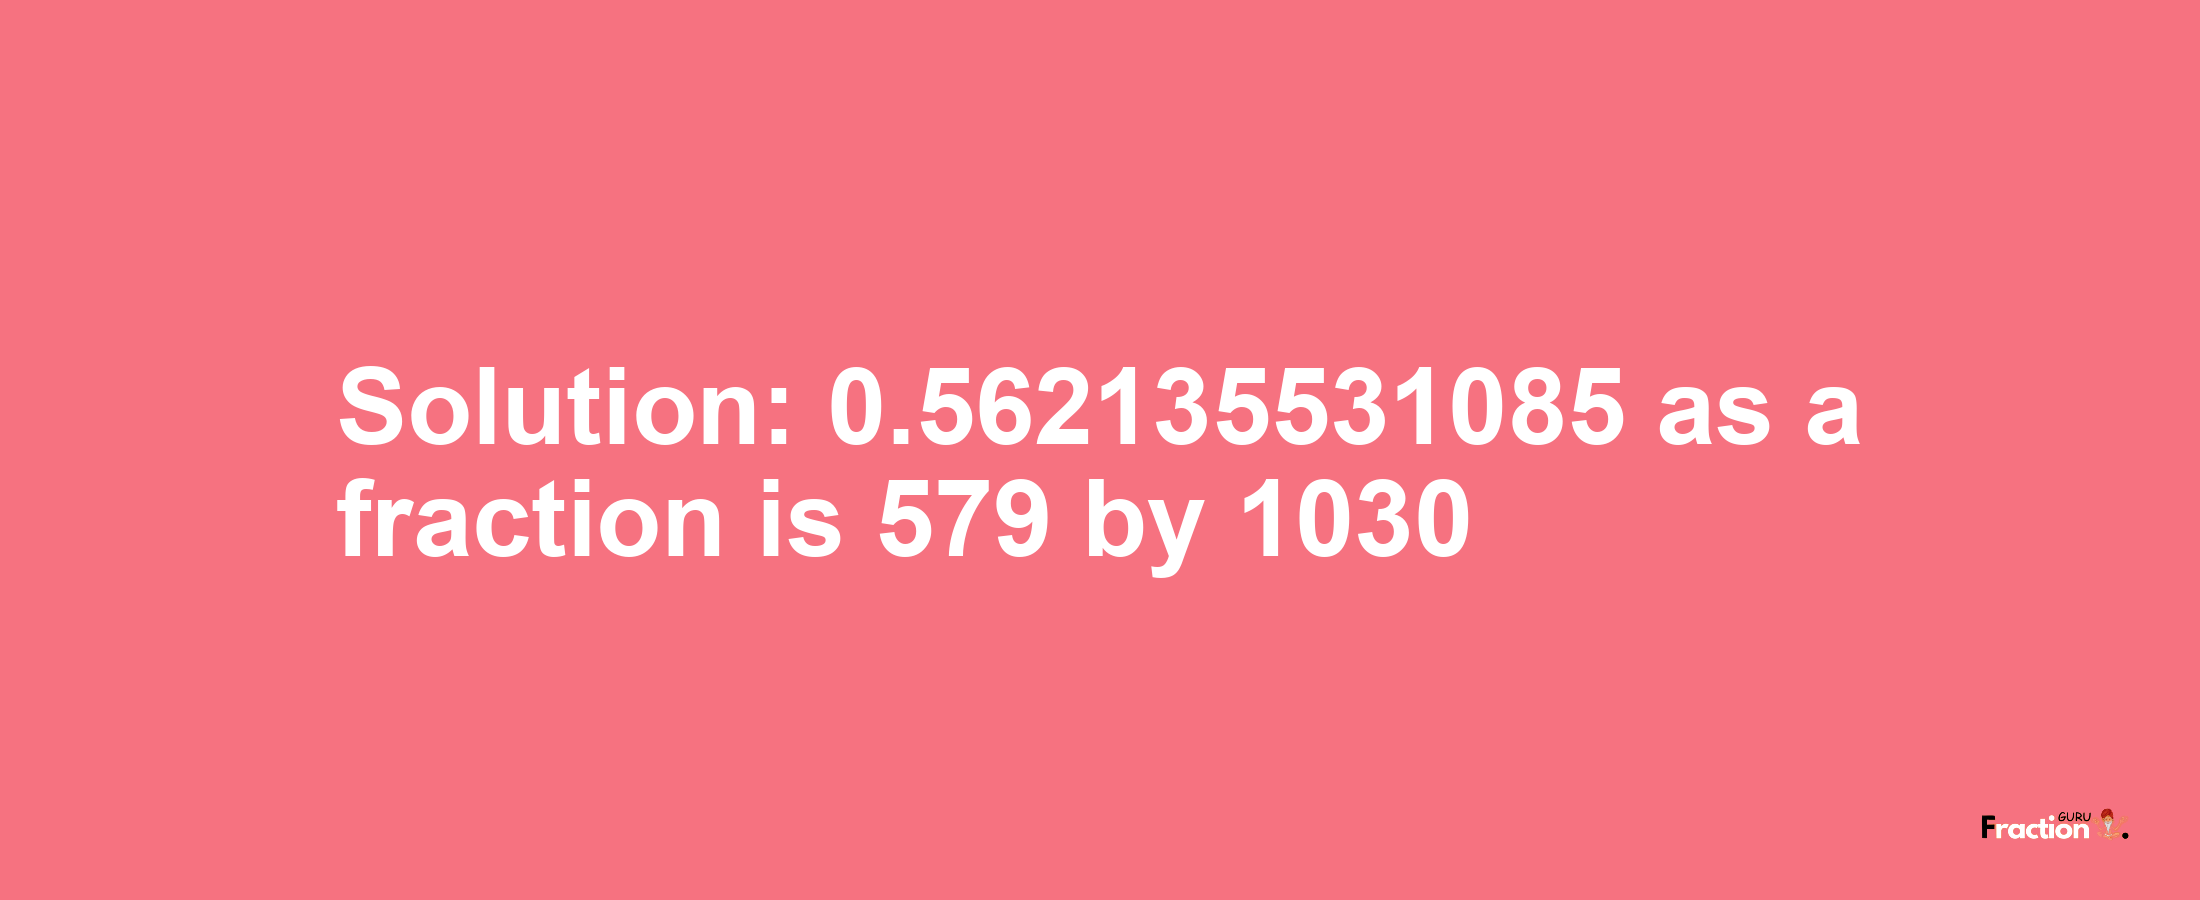 Solution:0.562135531085 as a fraction is 579/1030